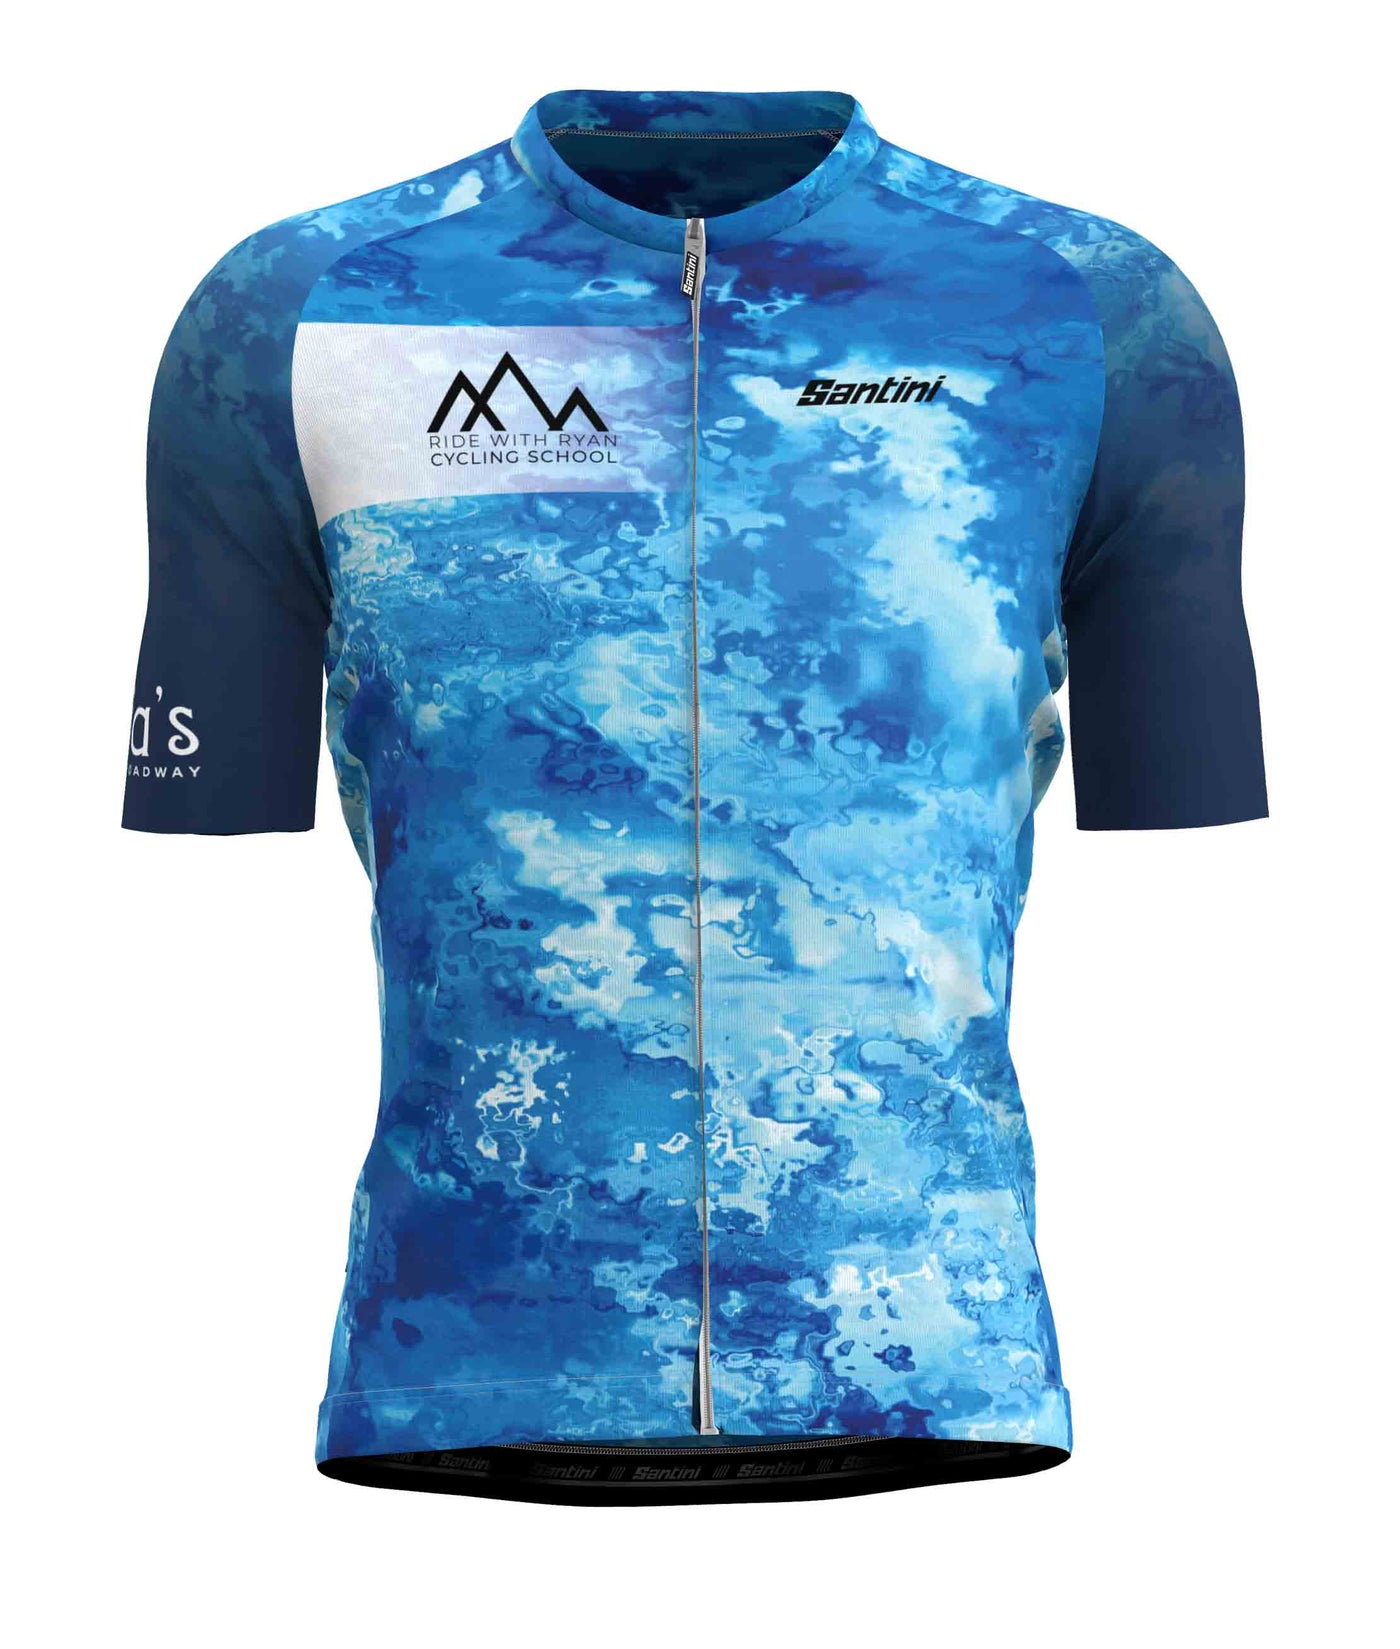 Maillot de vélo SMART Ride with Ryan Cycling School - Homme